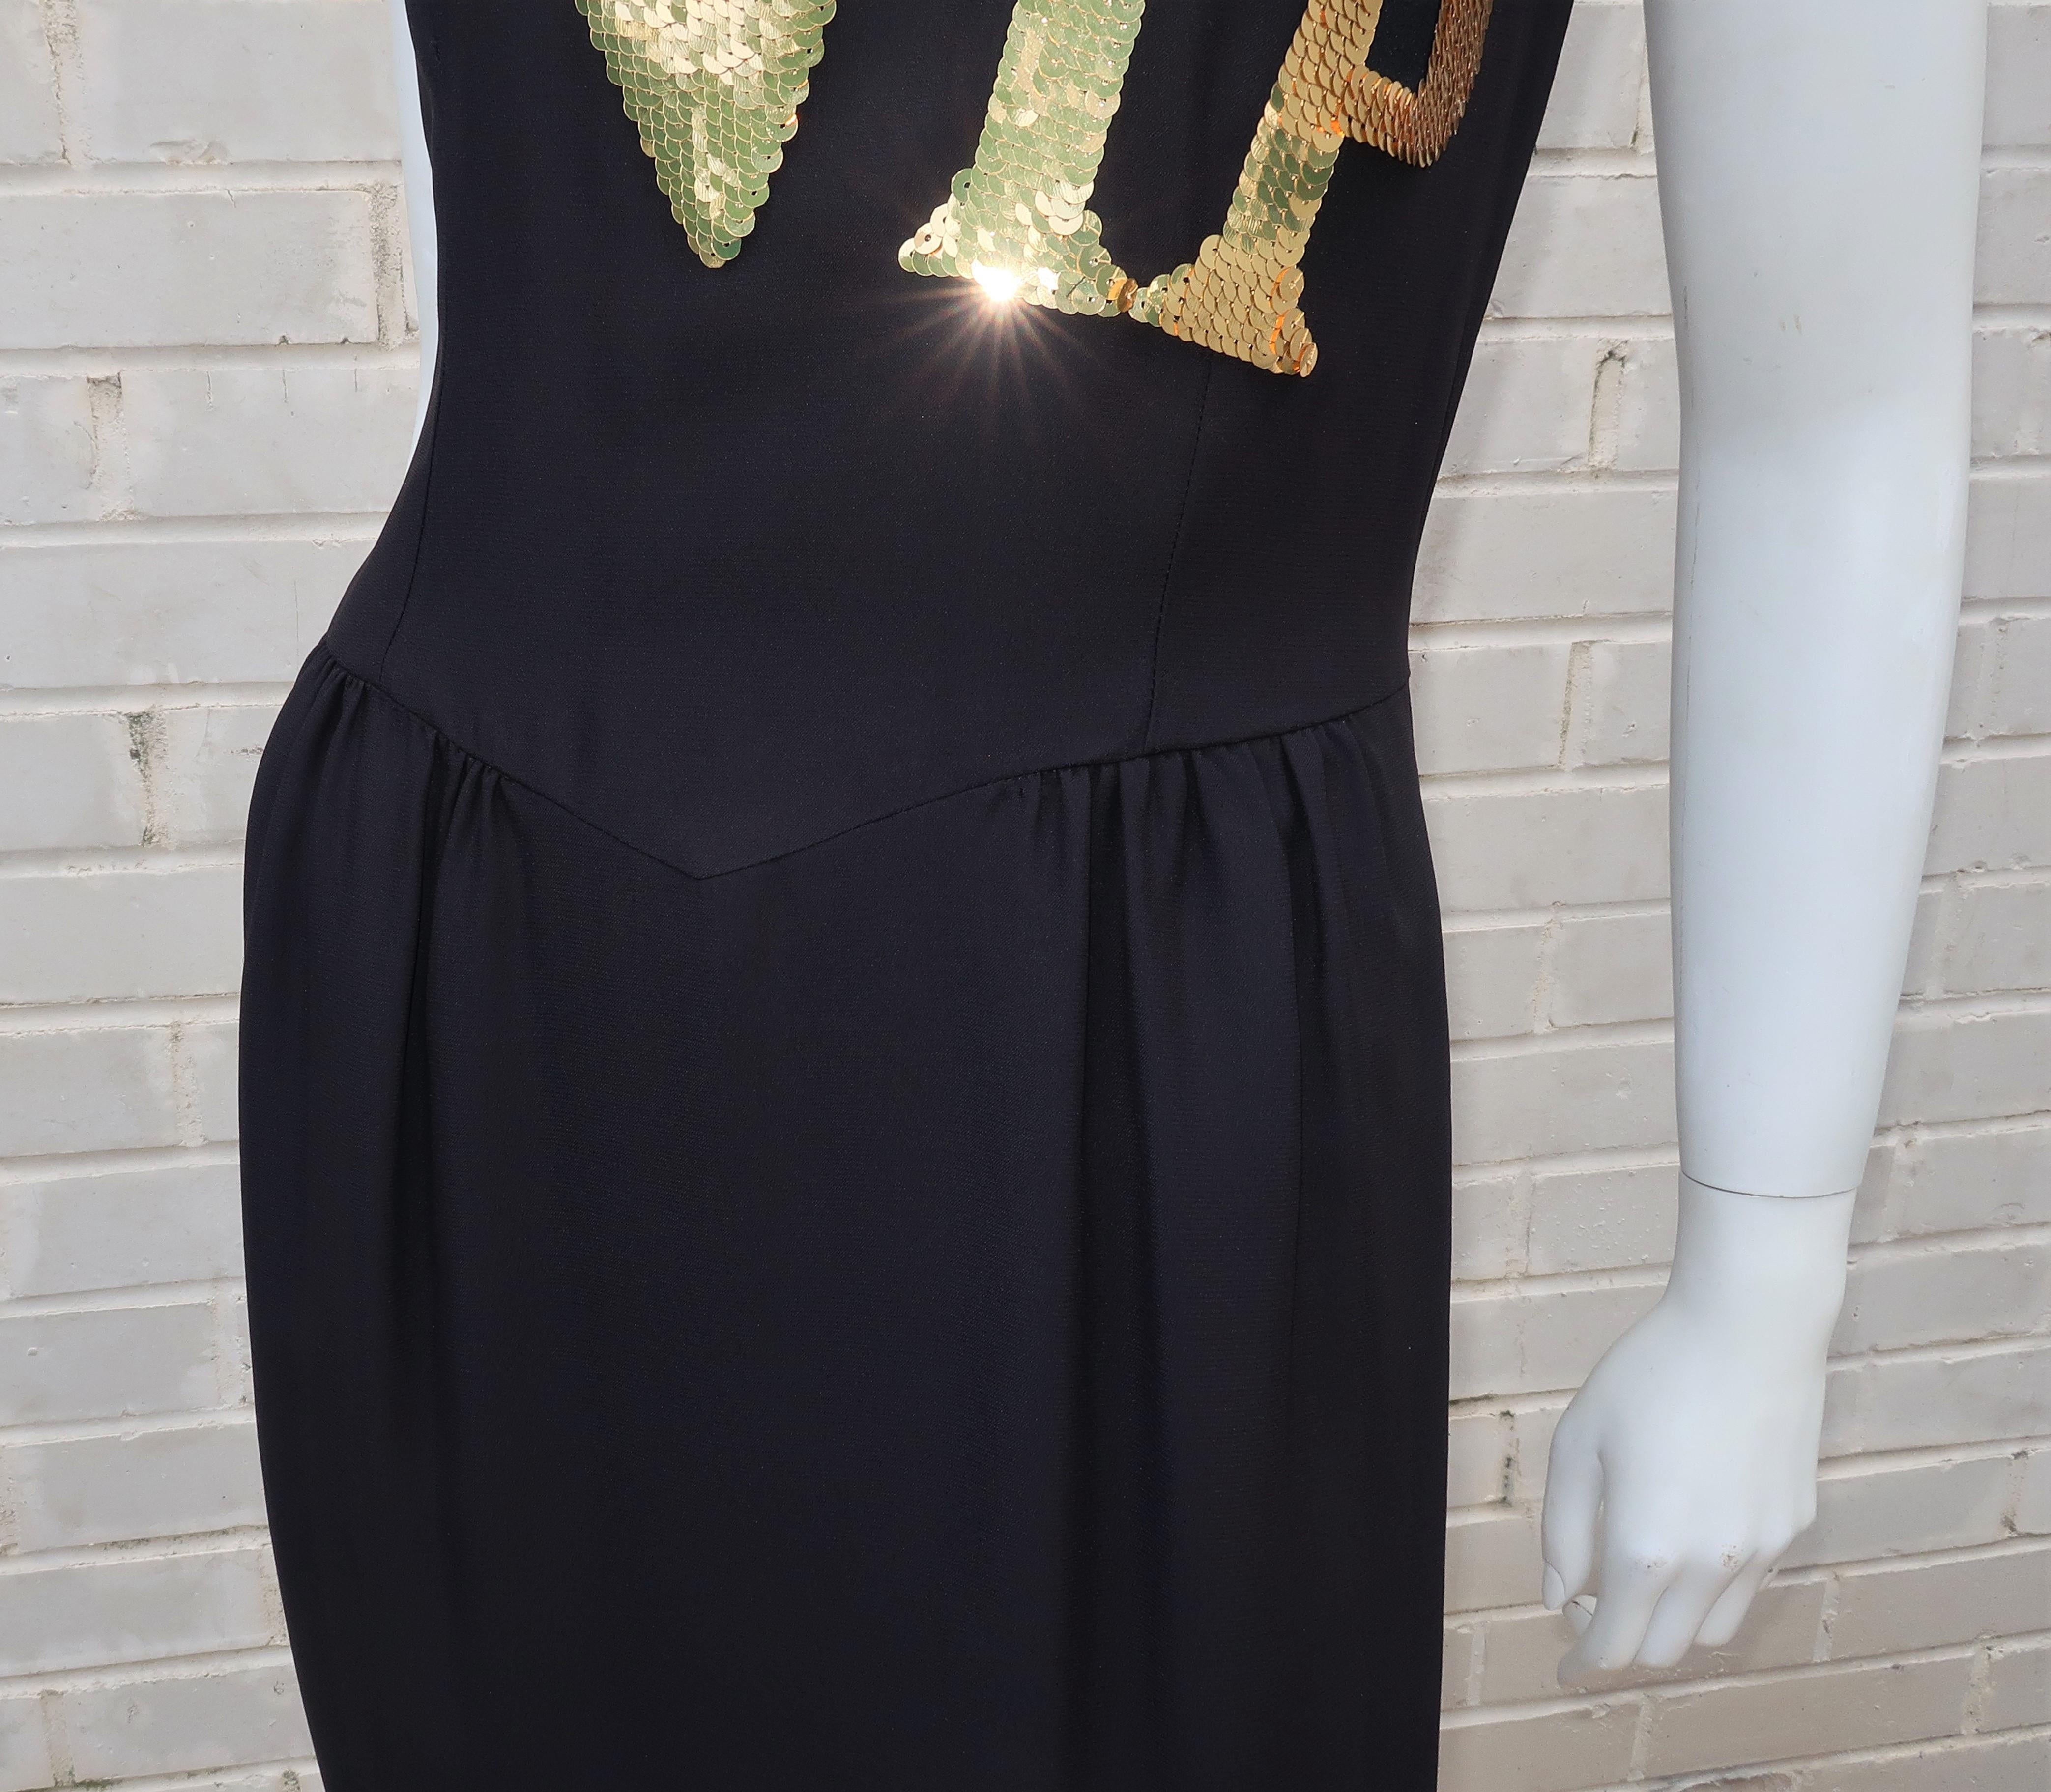 Moschino Couture Black & Gold Sequin ‘VIP’ Cocktail Dress 1